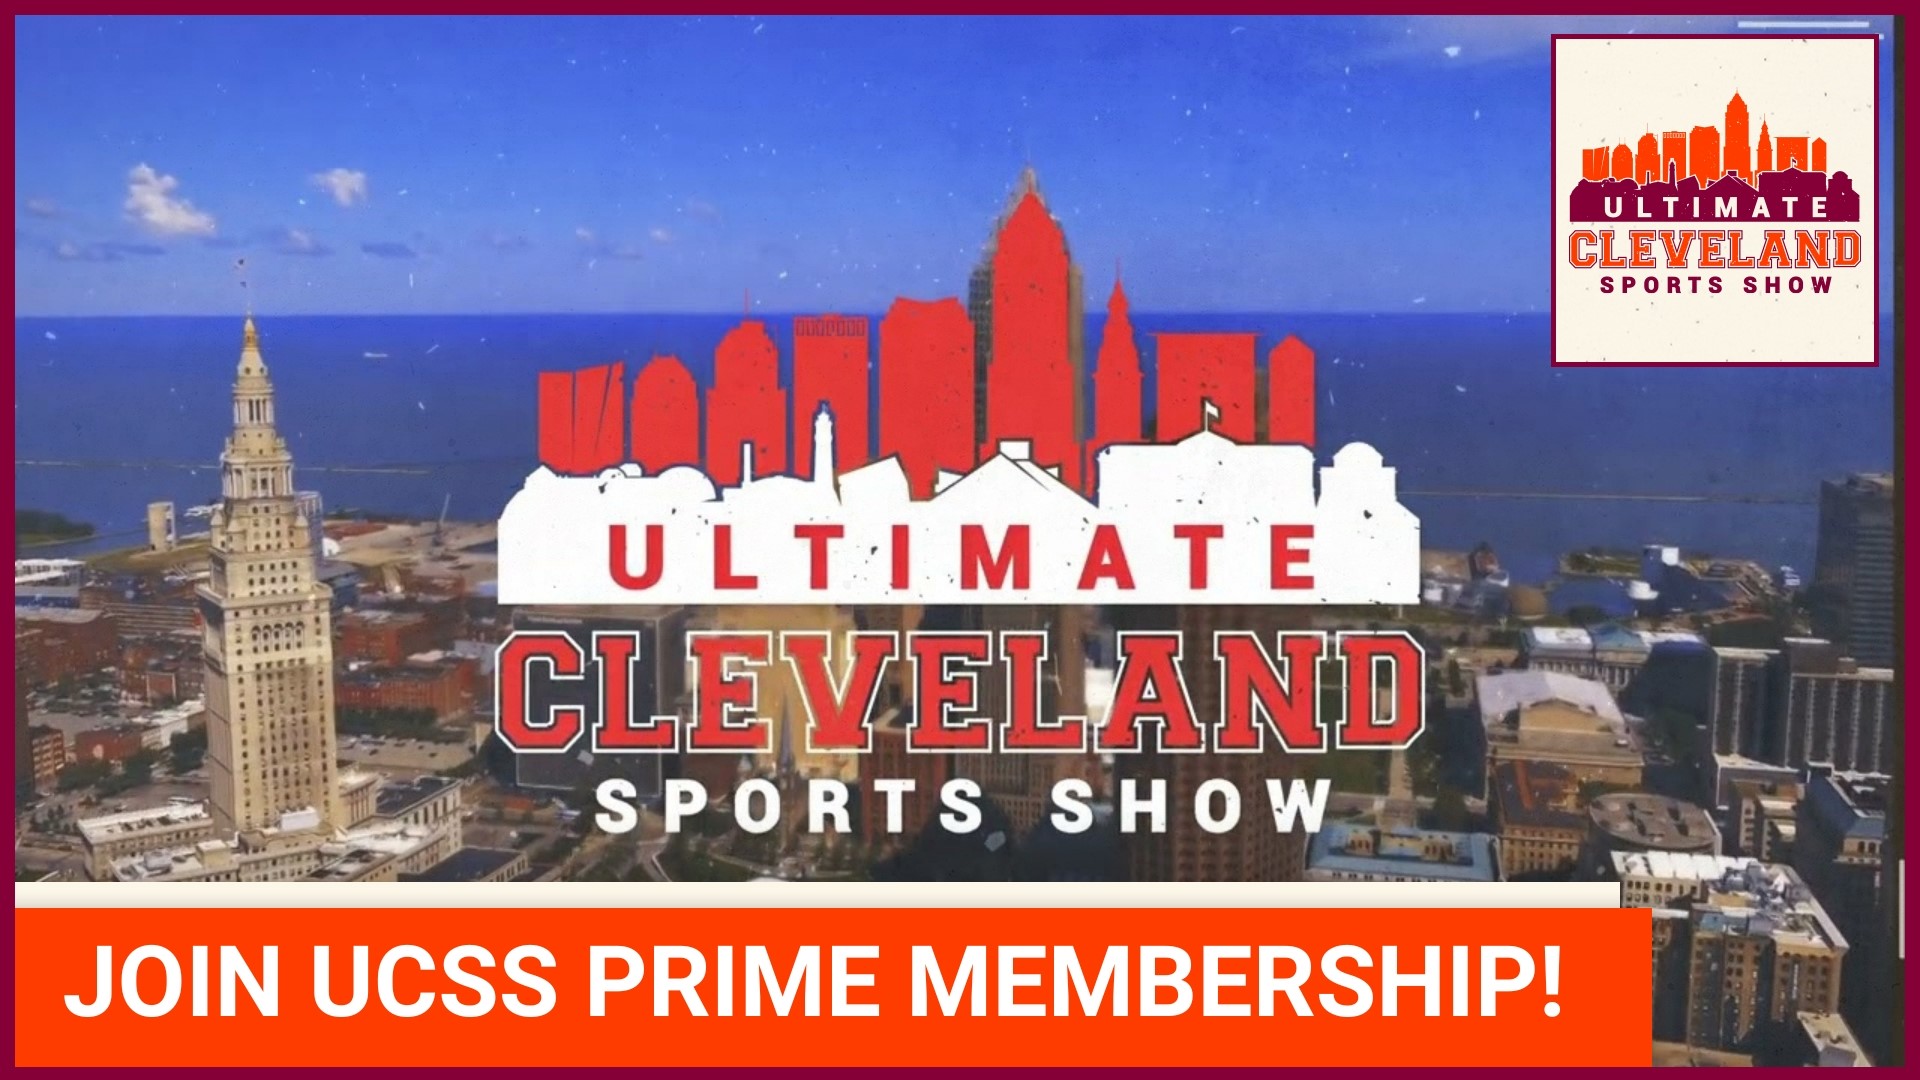 Mike Polk Jr. tells our loyal fans why you should definitely become a prime member!